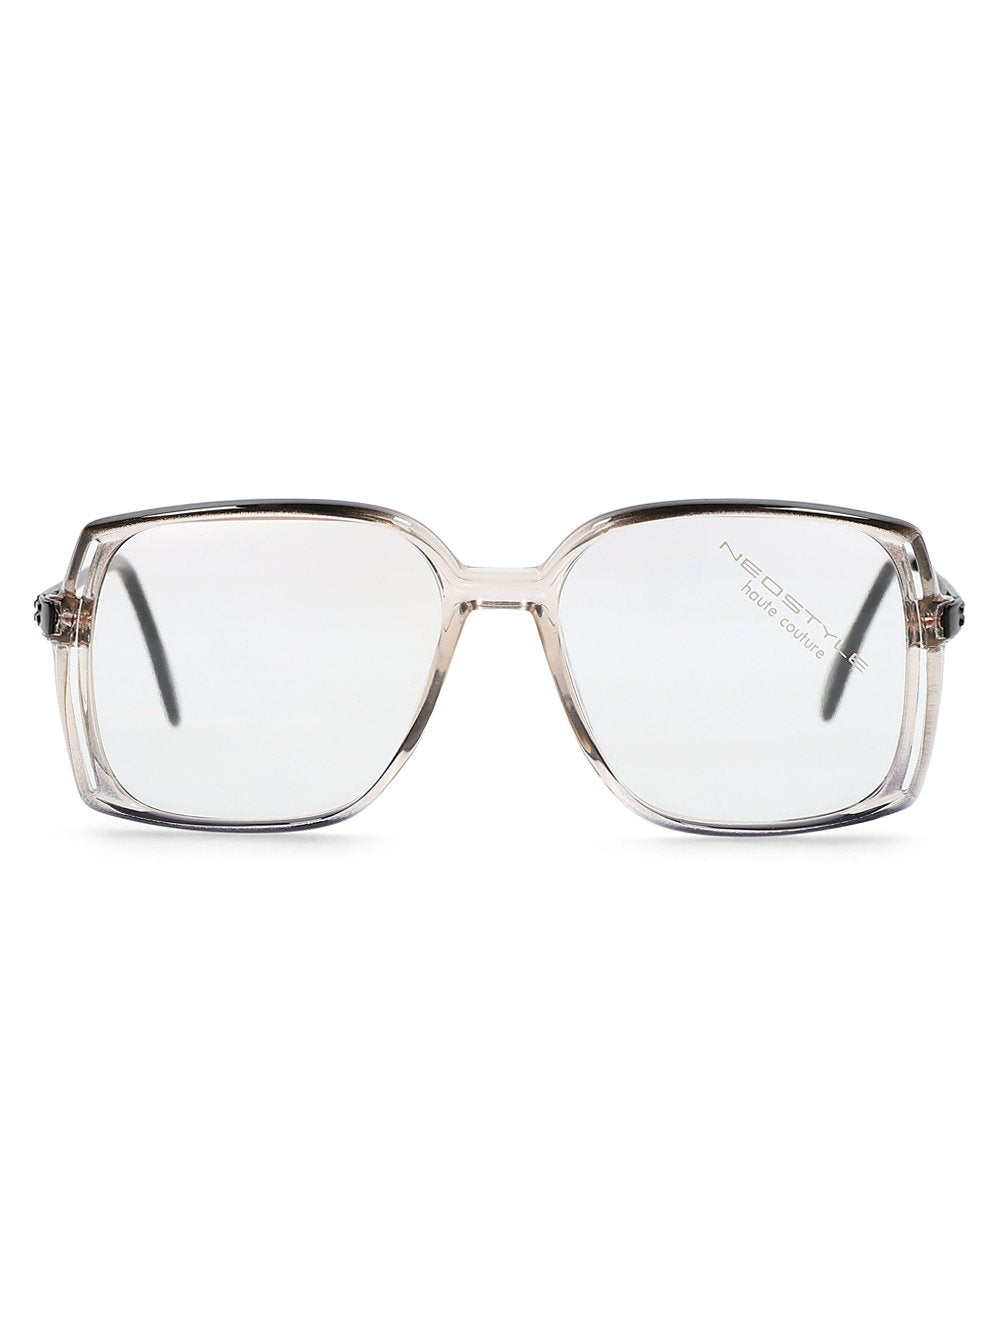 NEOSTYLE ROTARY24 Acetate / Metal Glasses & Frames - André Opticas